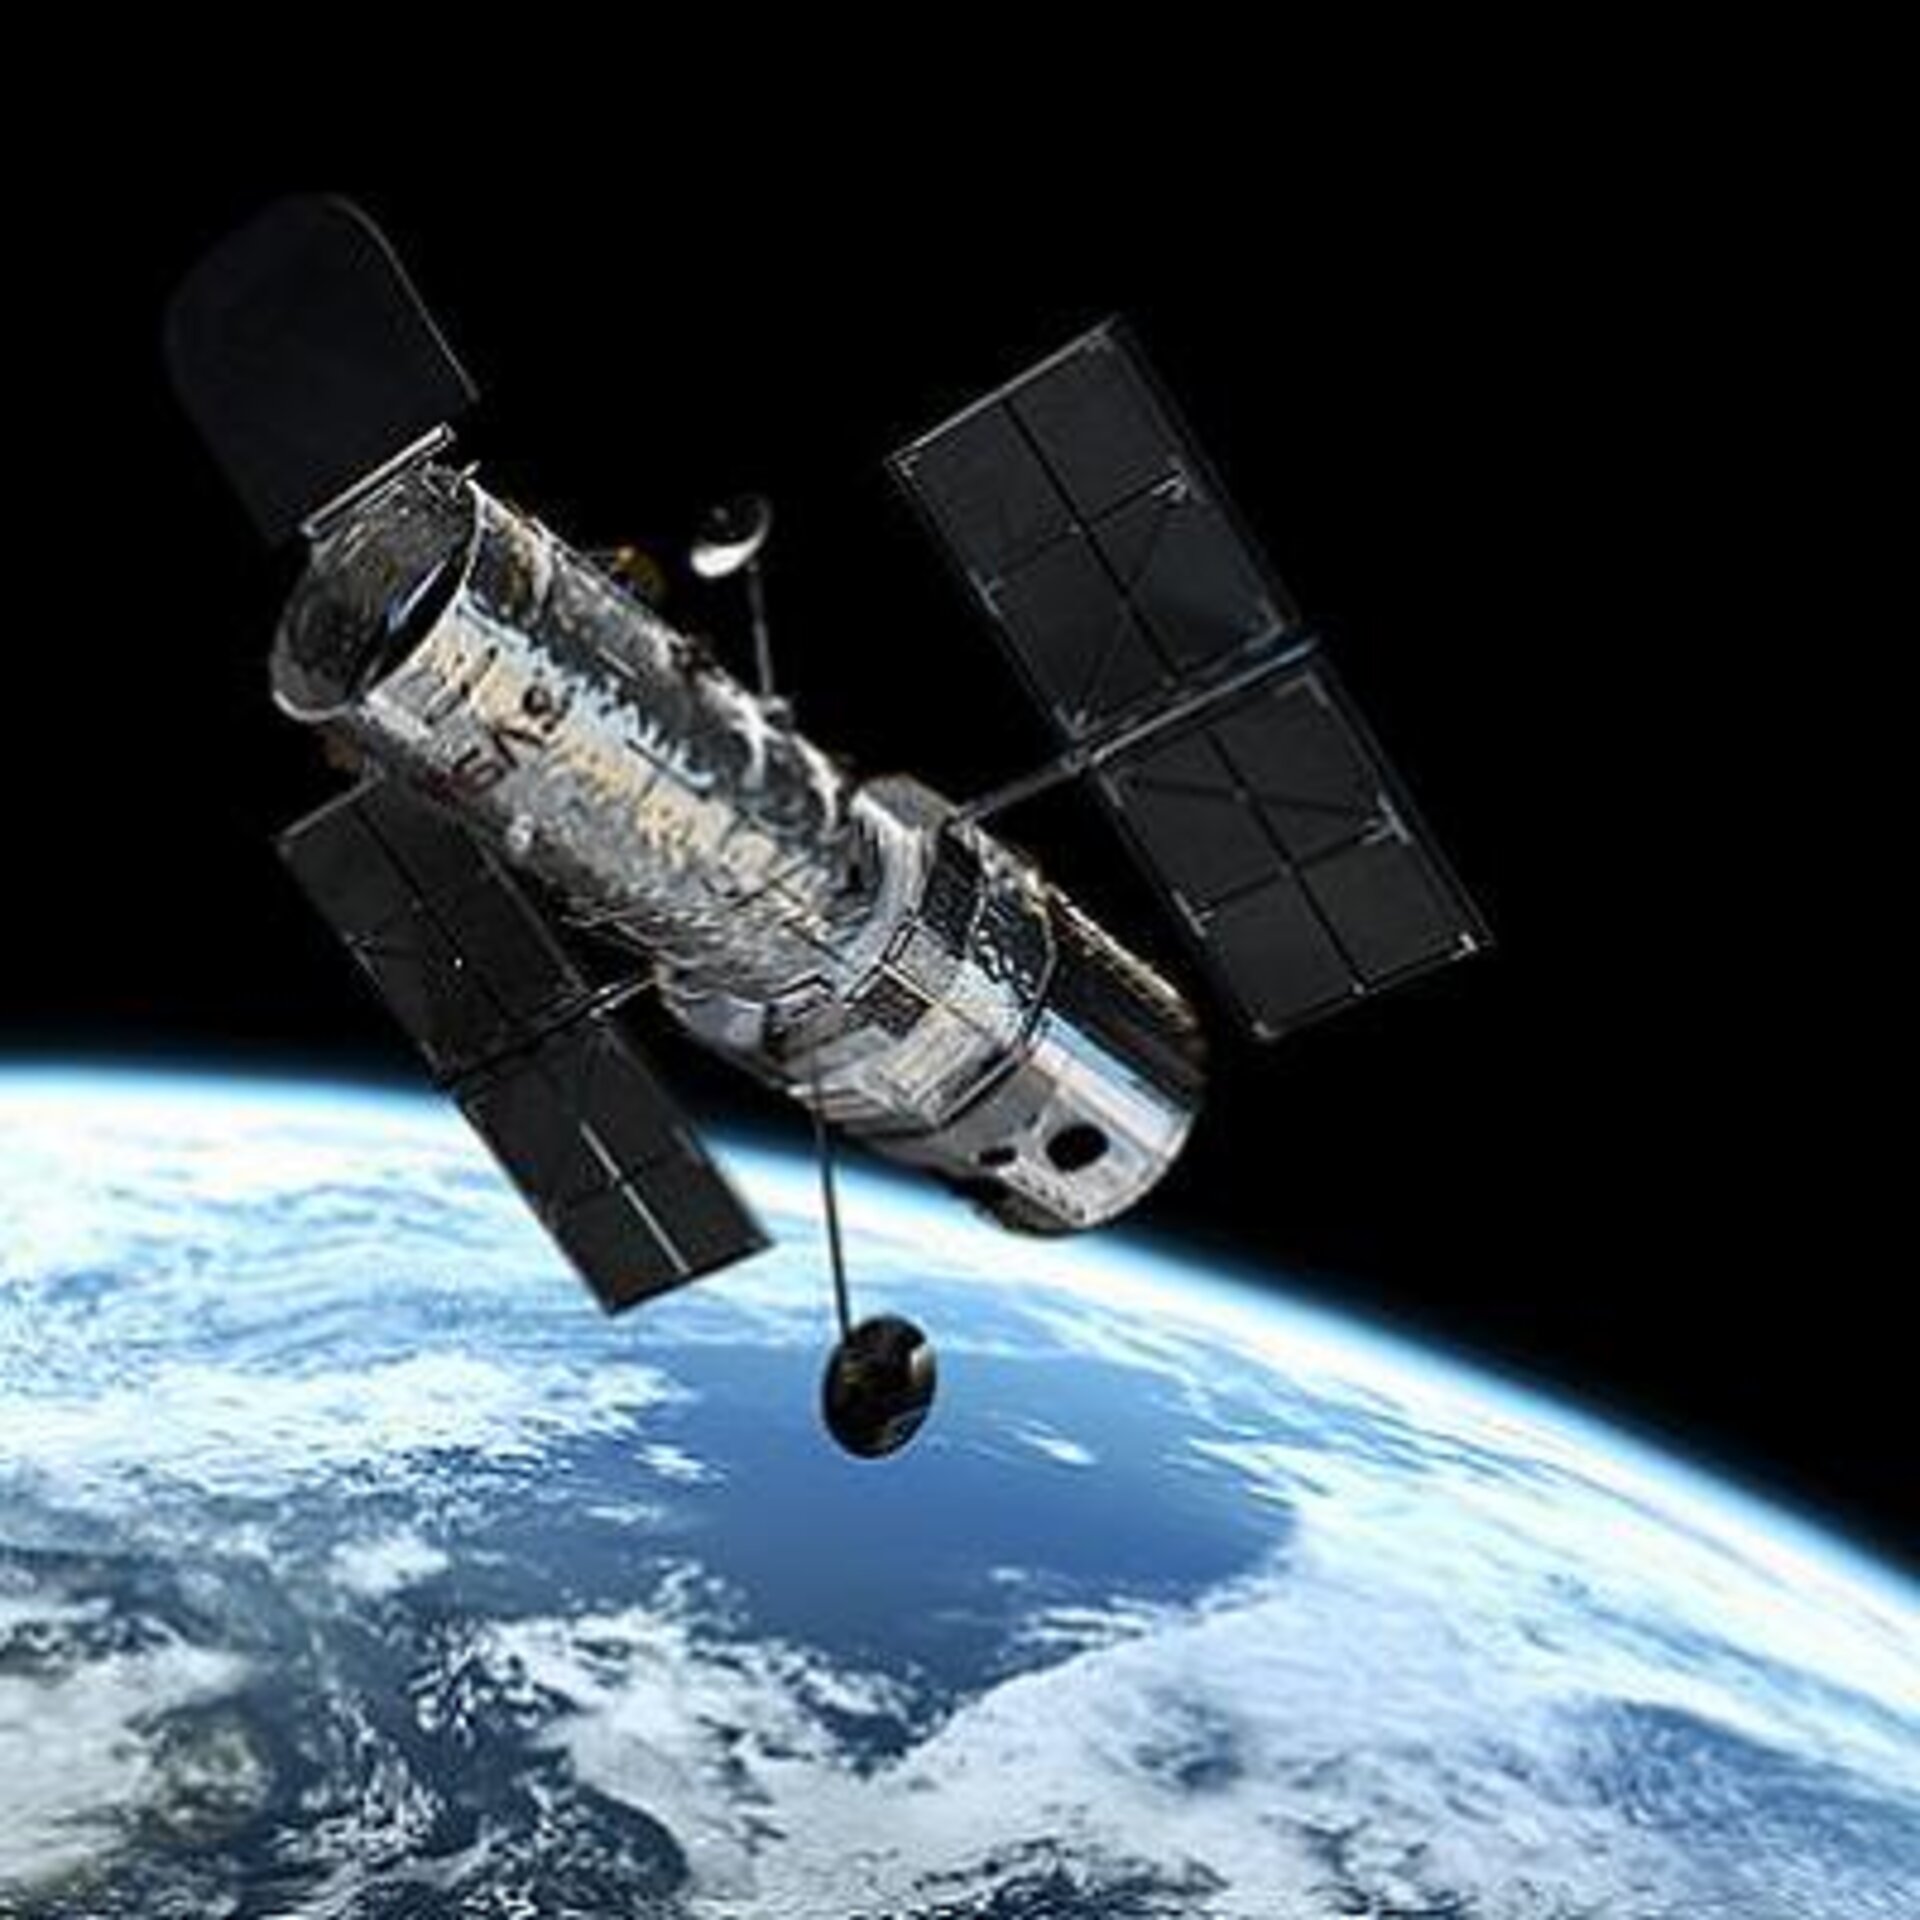 Hubble's current solar arrays will last until its end-of-life